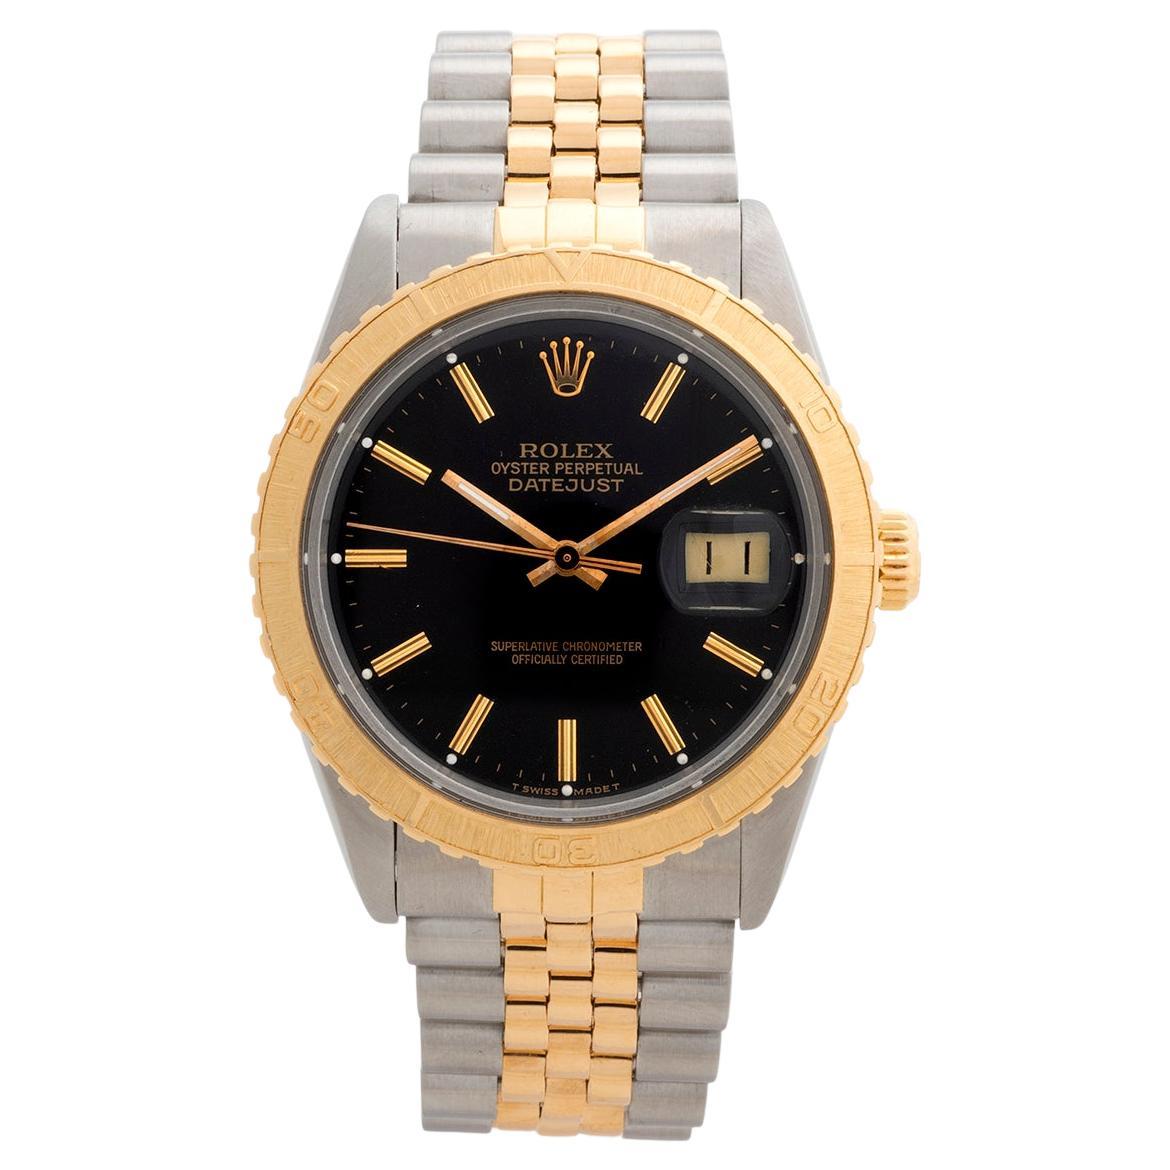 Our vintage and very rare Rolex Datejust Turn-o-graph reference 16253 aka the Thunderbird features a 36mm stainless steel case with rotating 18k yellow gold bezel and 18k yellow gold and stainless steel jubilee bracelet and plexiglass. This